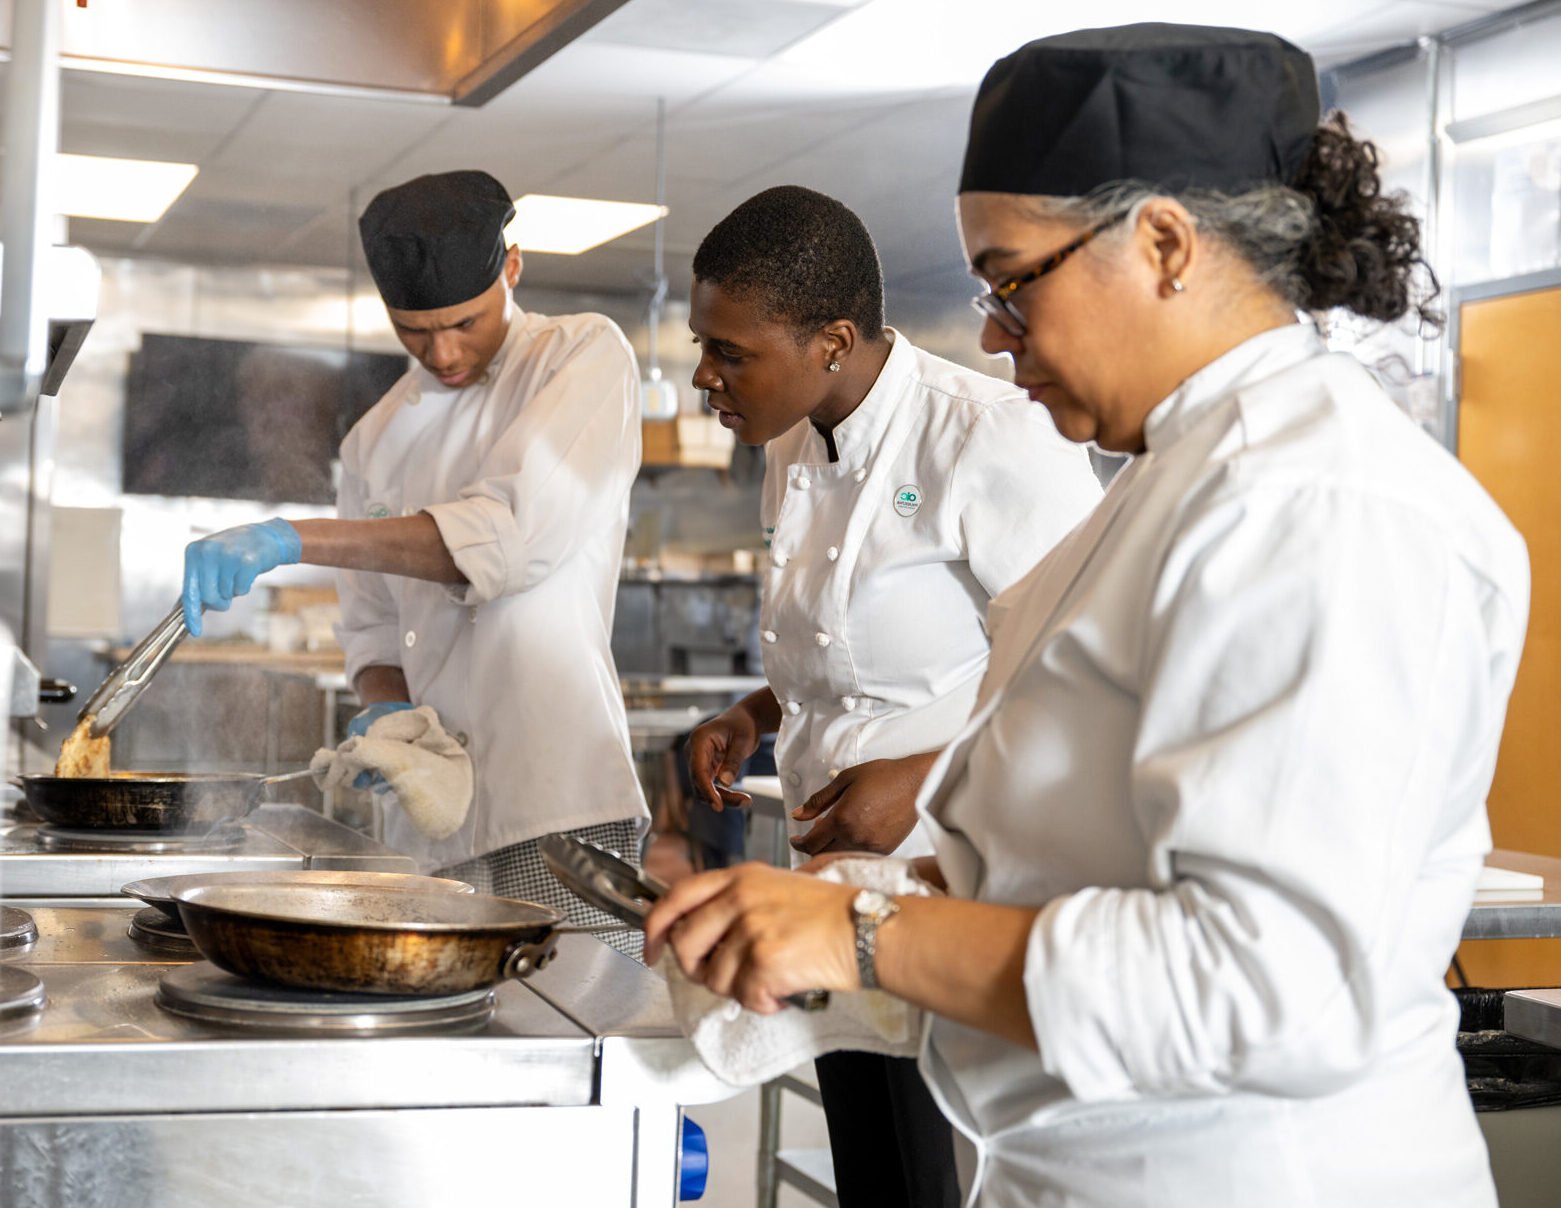 OIC Philadelphia's Culinary Arts Chef Instructor Jean provides hands-on training in North Philly in OIC's Commercial Kitchen